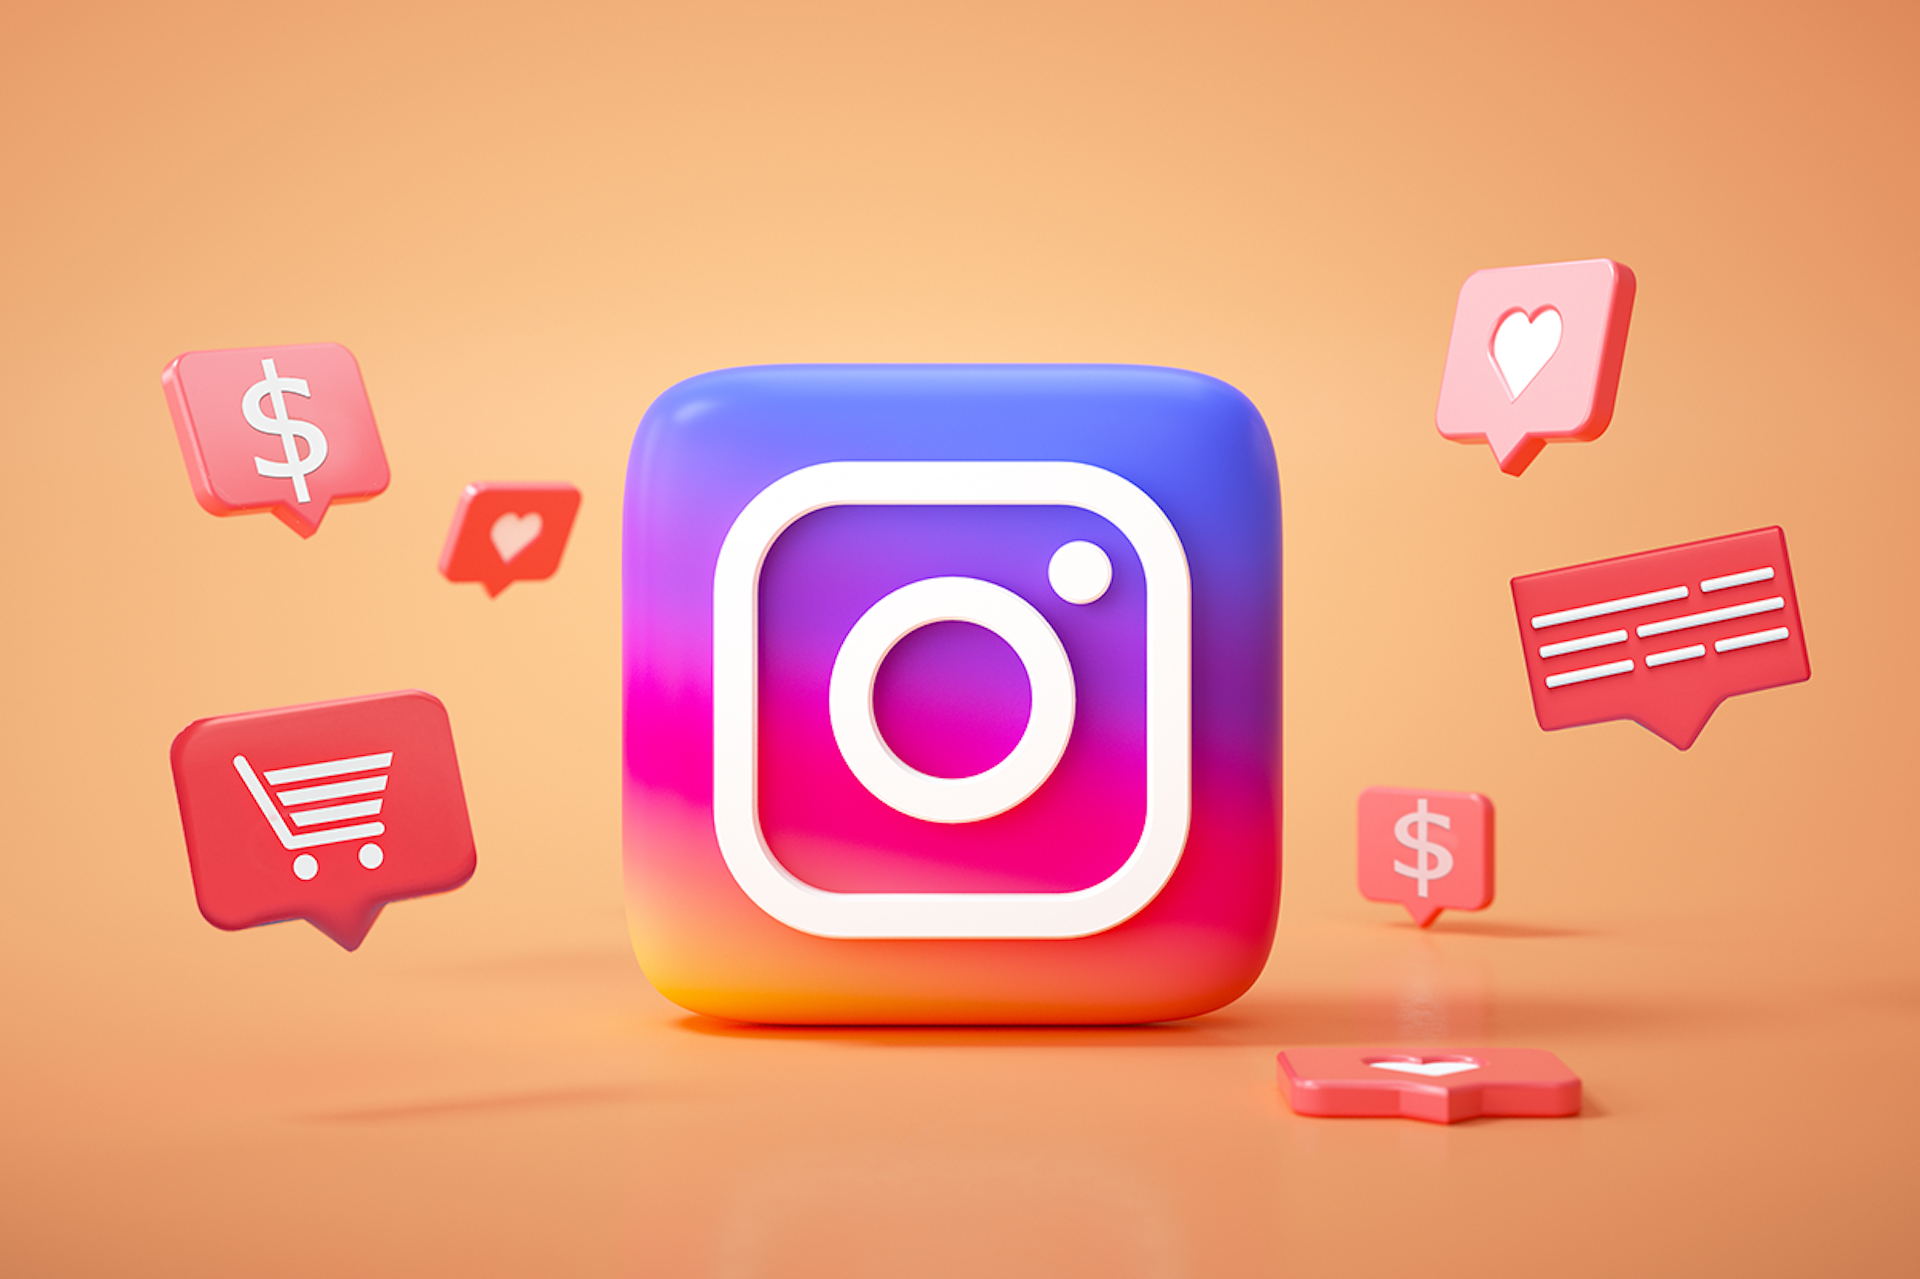 An illustration showing a large Instagram logo in the center, surrounded by floating commerce symbols like a shopping cart and dollar signs. Social media symbols are also floating including a comment blurb and hearts. How to use Instagram ads blog post.